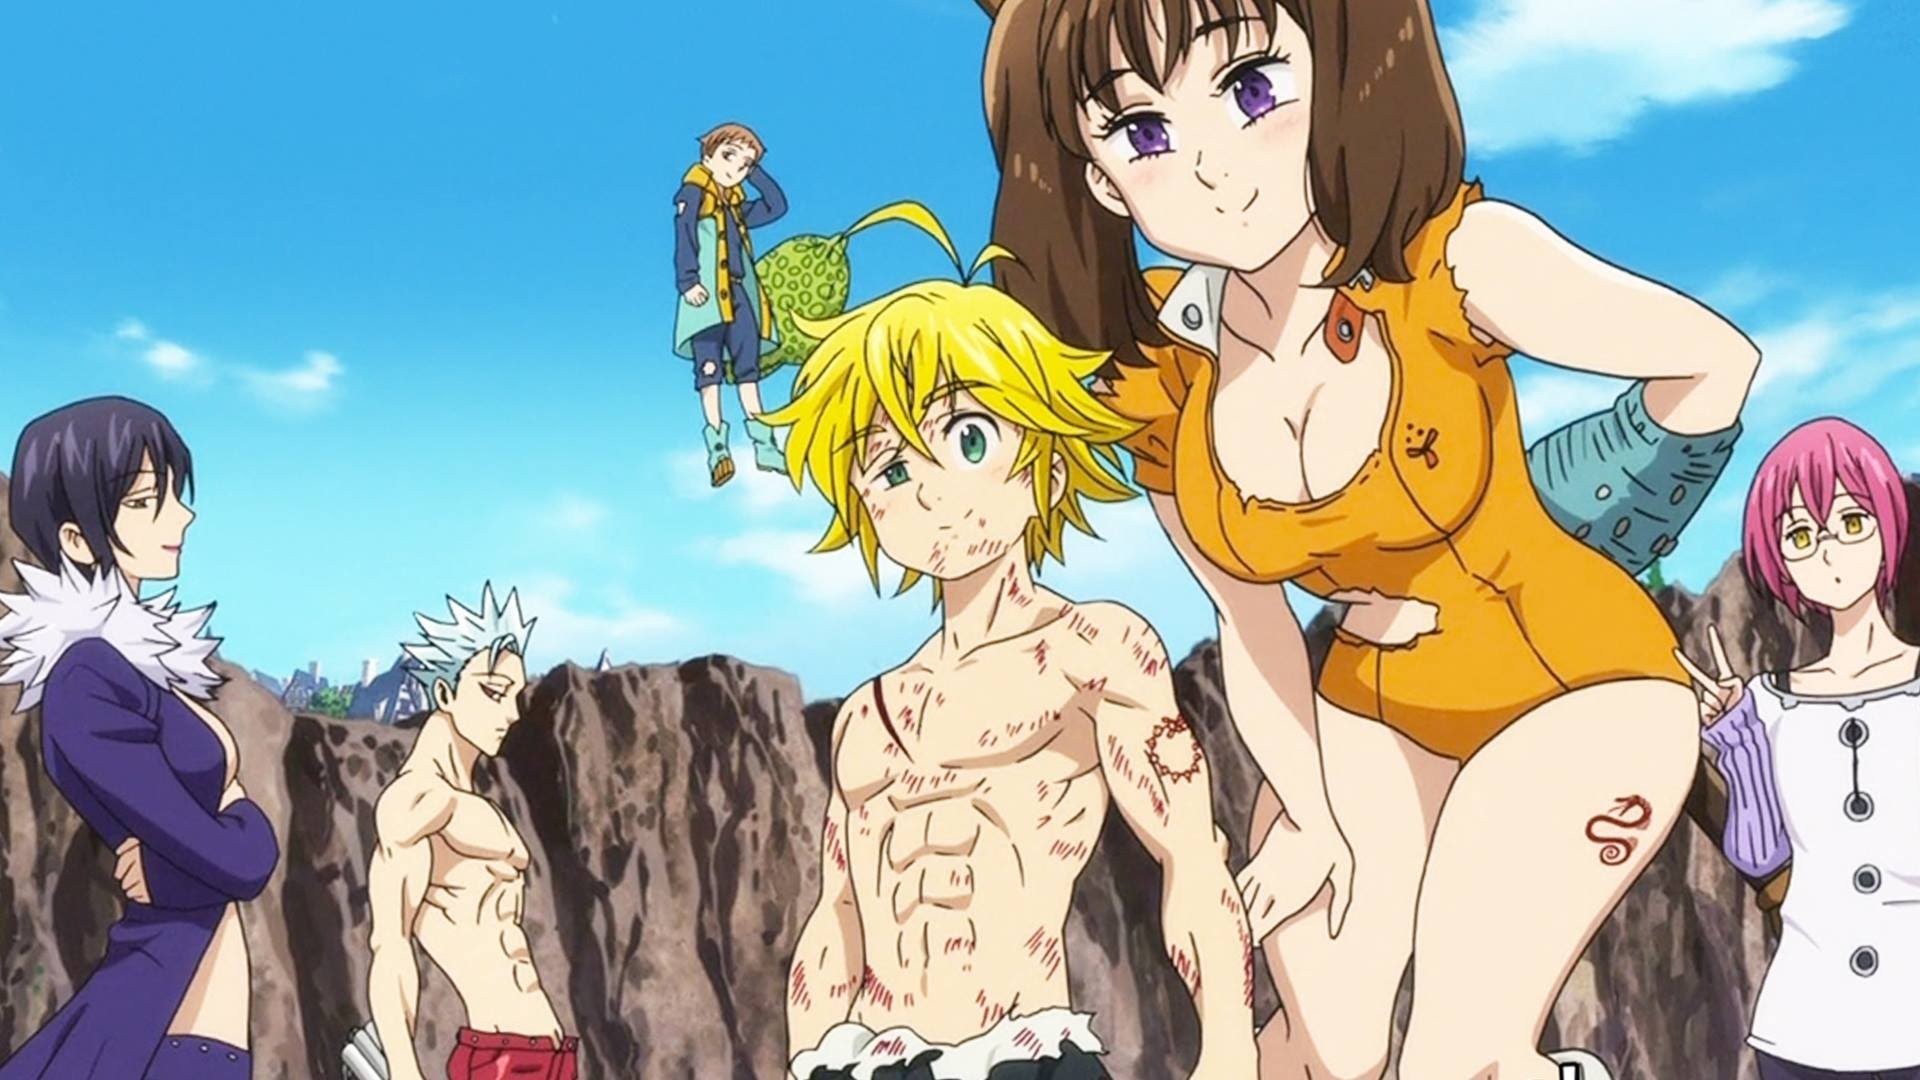 1920x1080  The Seven Deadly Sins wallpapers